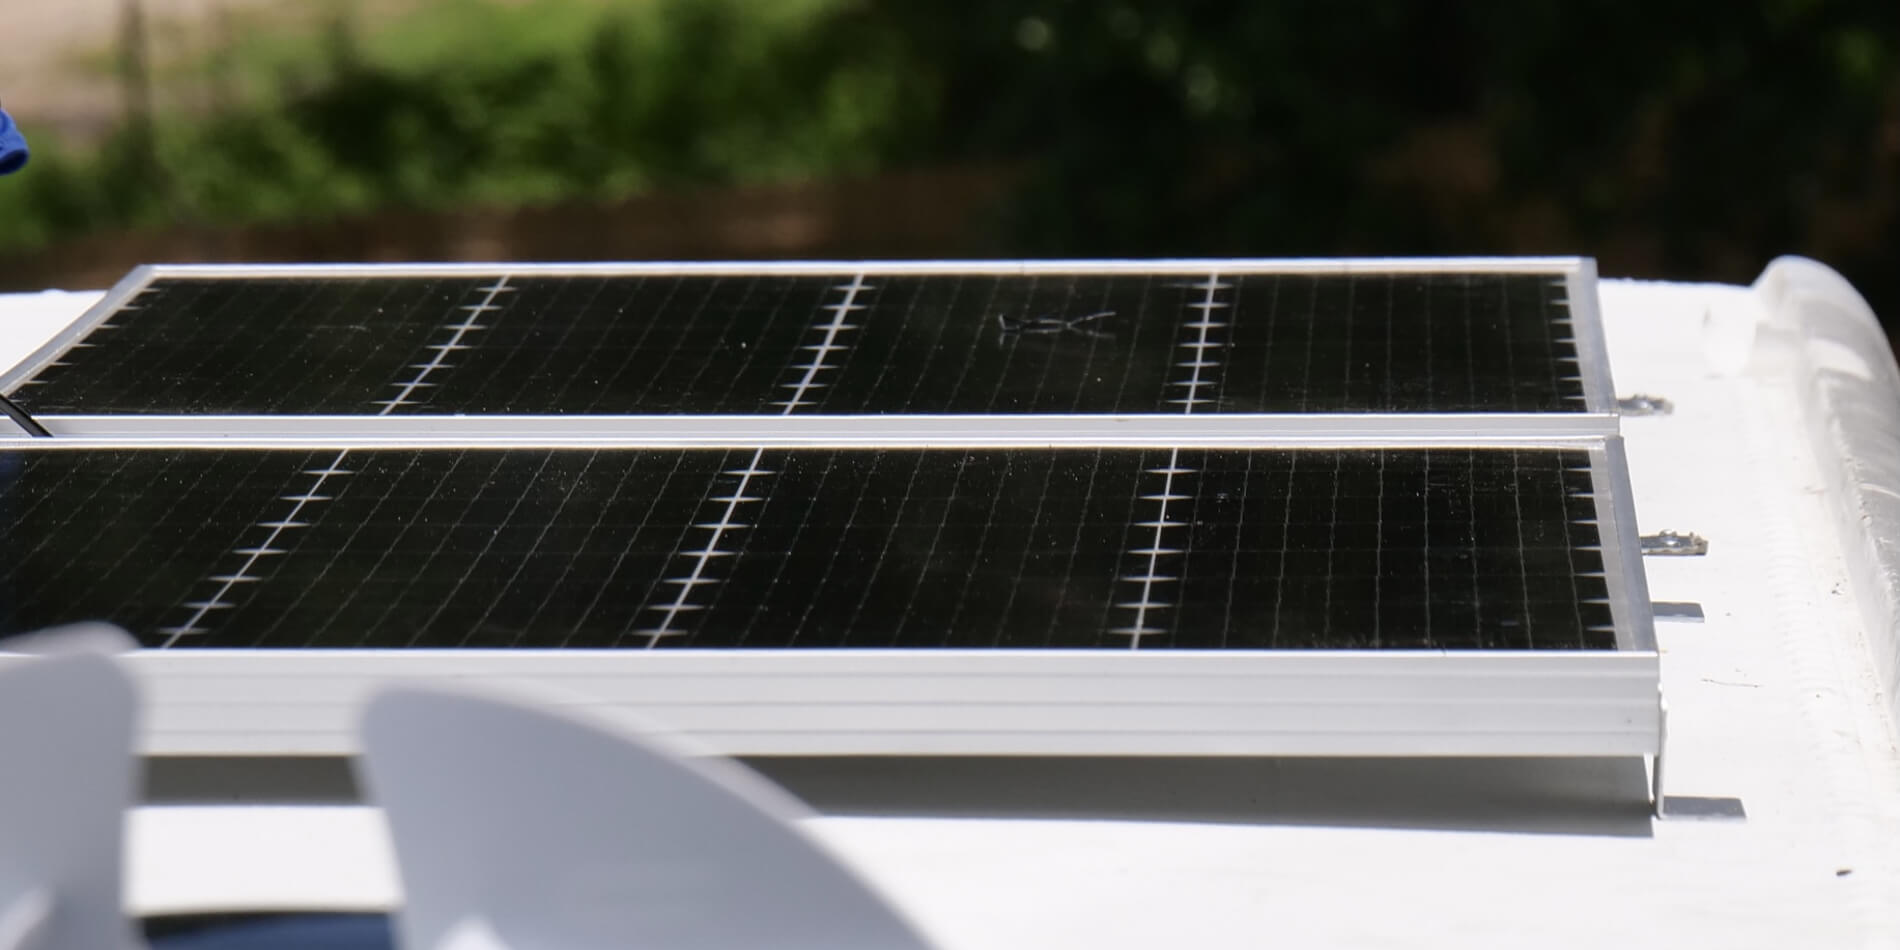 How does a solar panel system work?